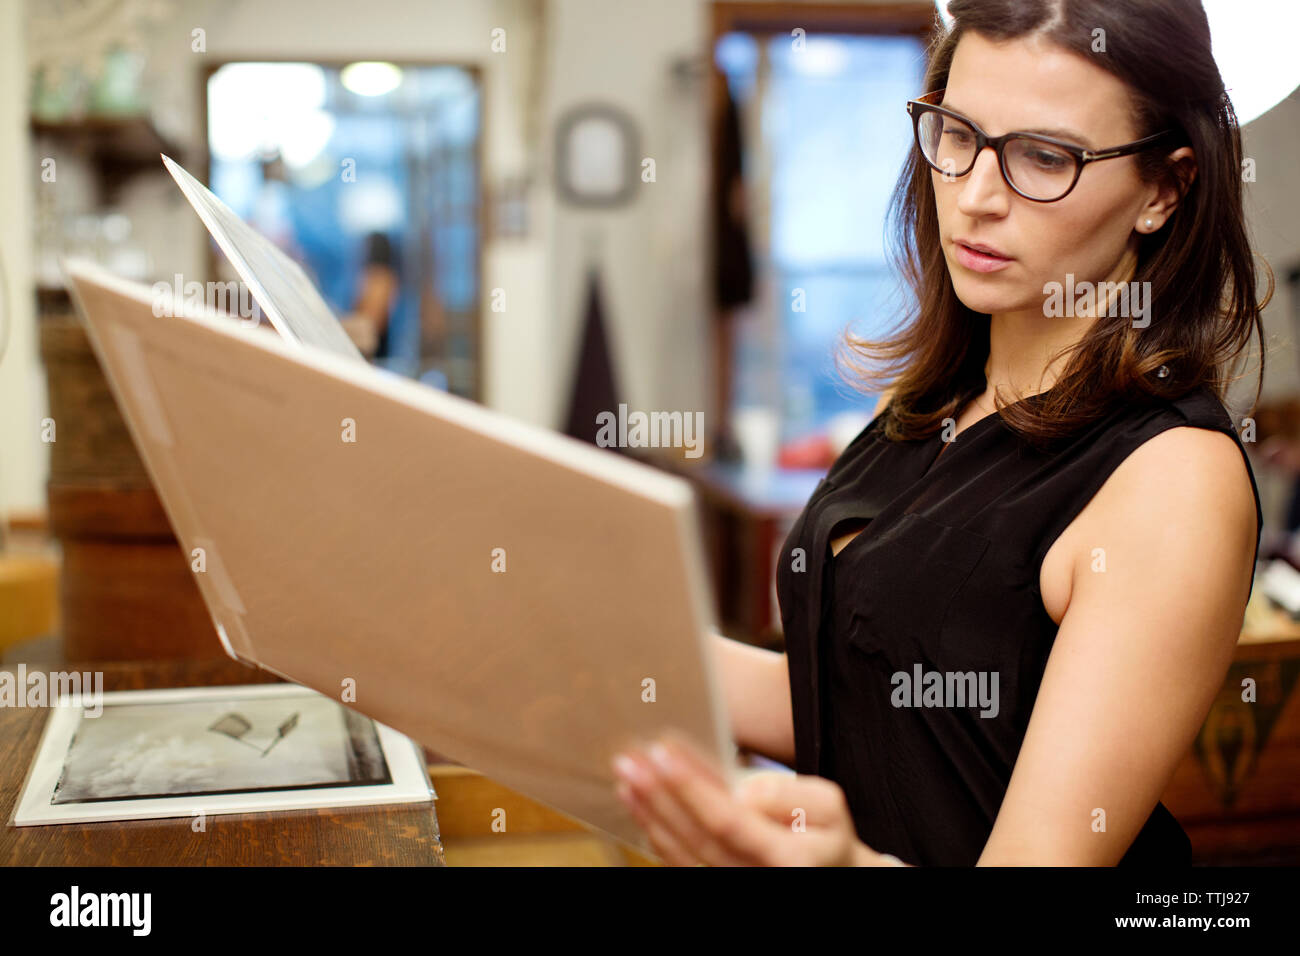 Woman looking at photographs while standing in store Stock Photo